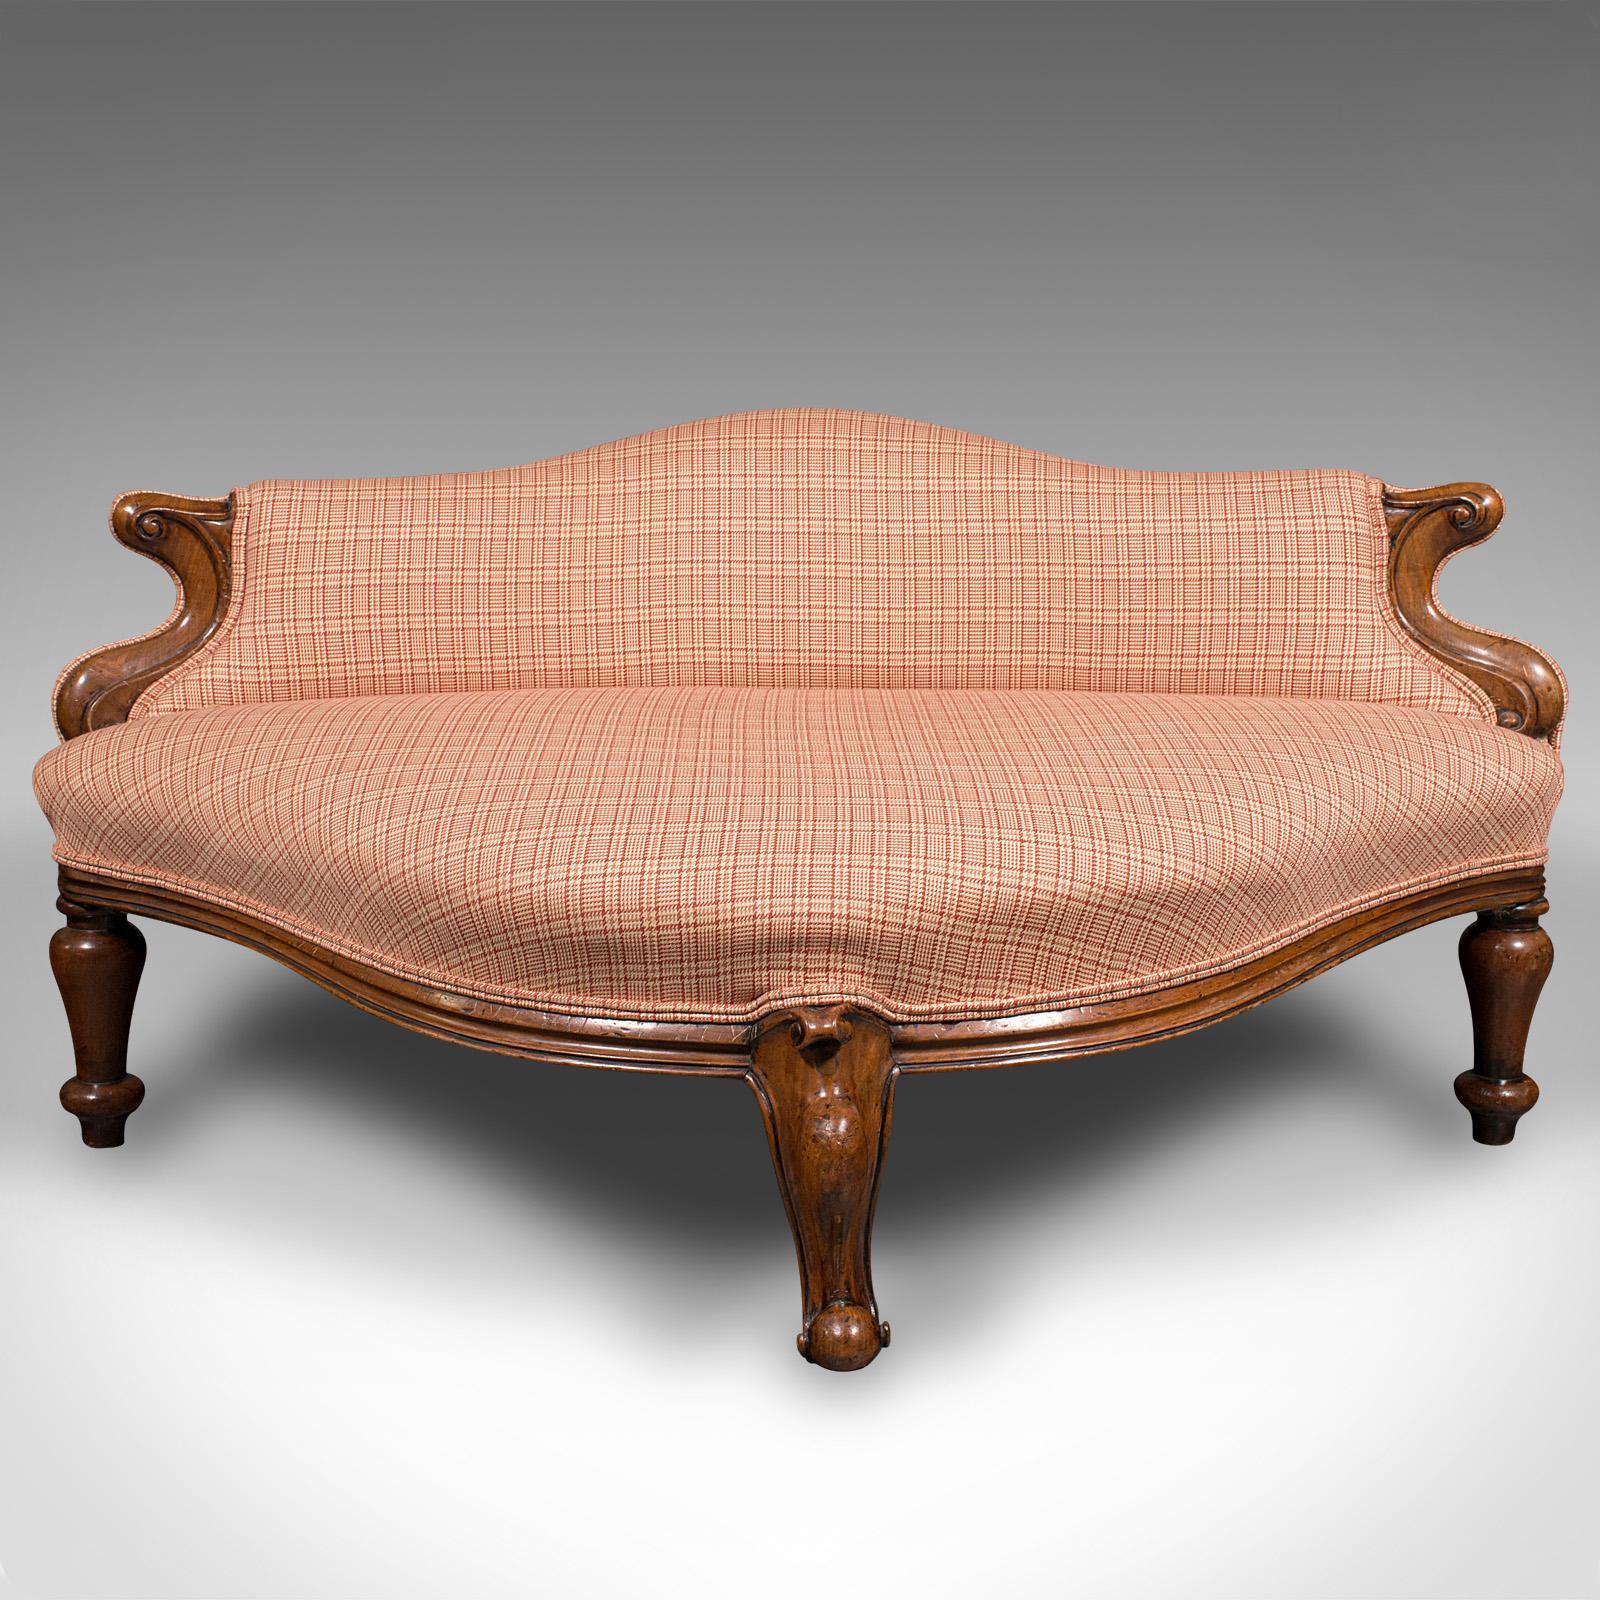 This is an antique love seat. An English, walnut and textile duet bench or dog bed, dating to the early Victorian period, circa 1840.

Beautifully presented seat, with appealing upholstery and fine show frame
Displays a desirable aged patina and